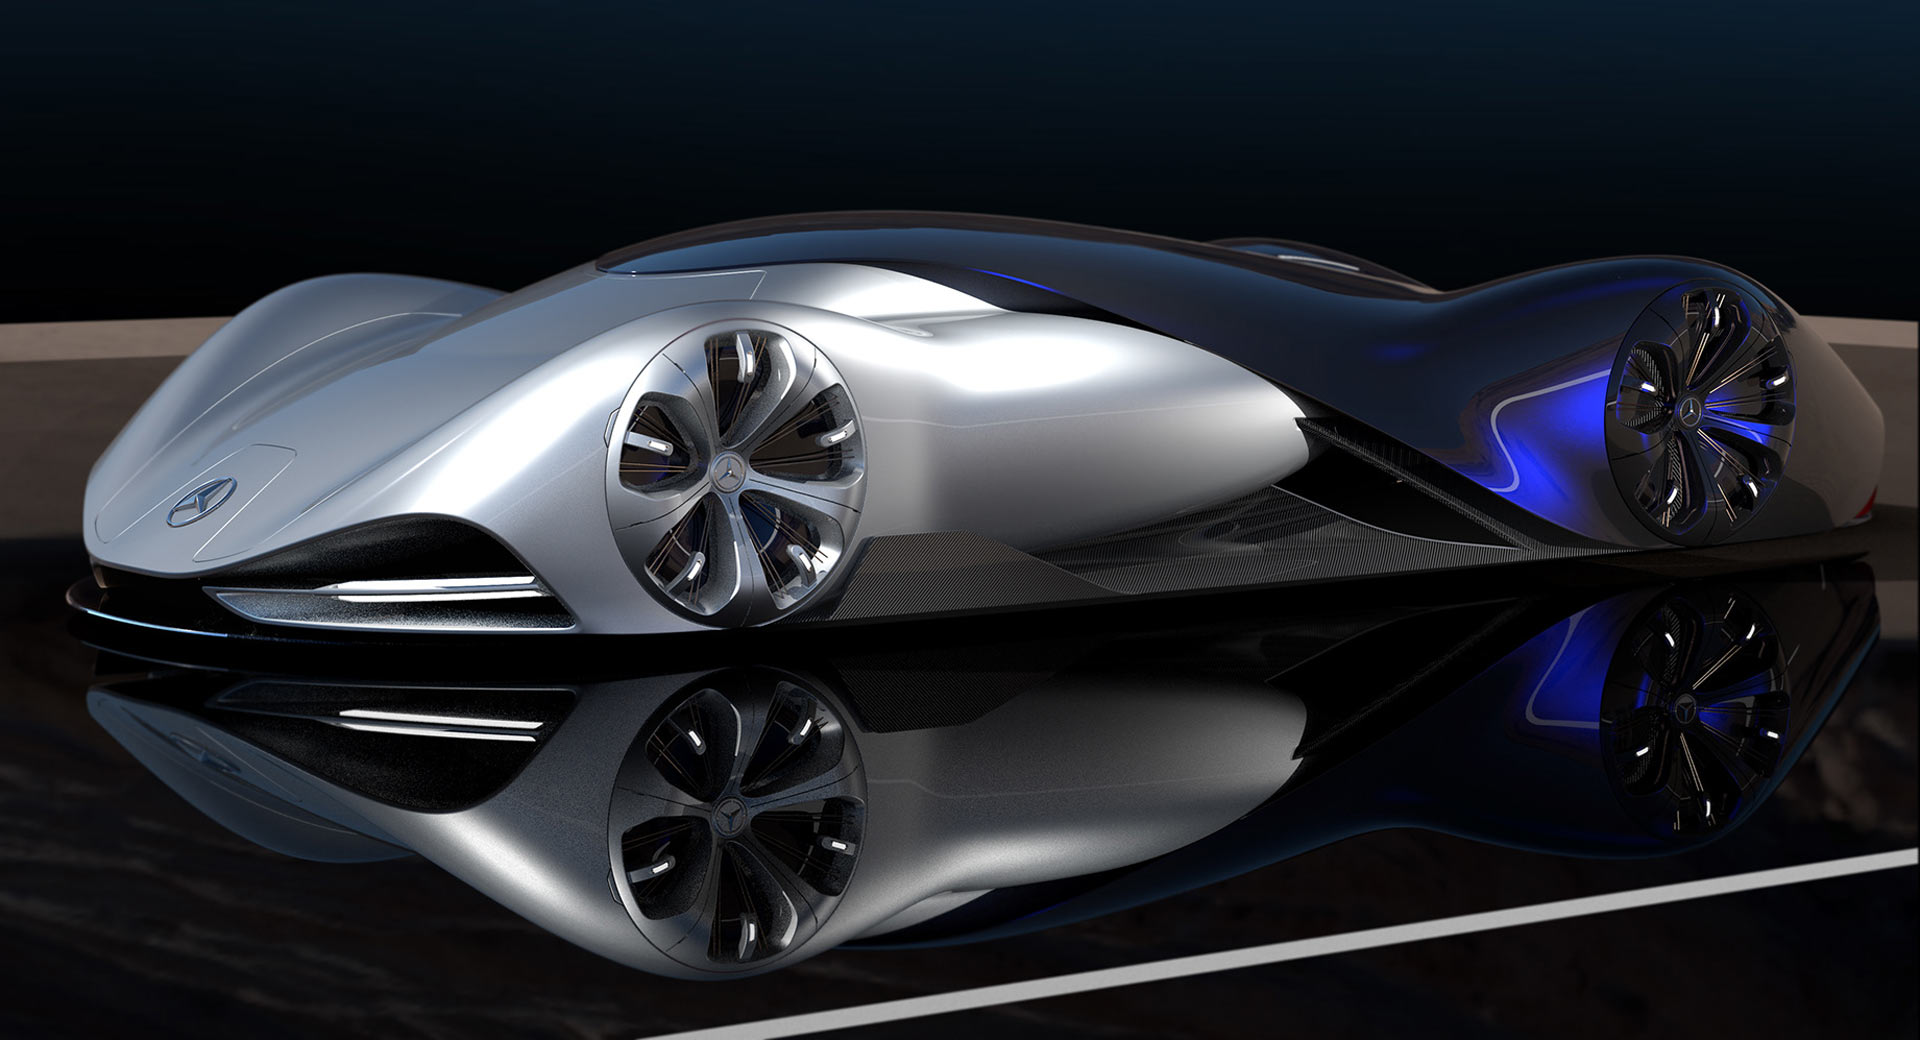 This Wild MercedesBenz Le Mans Concept Is Futuristic And Sleek Carscoops